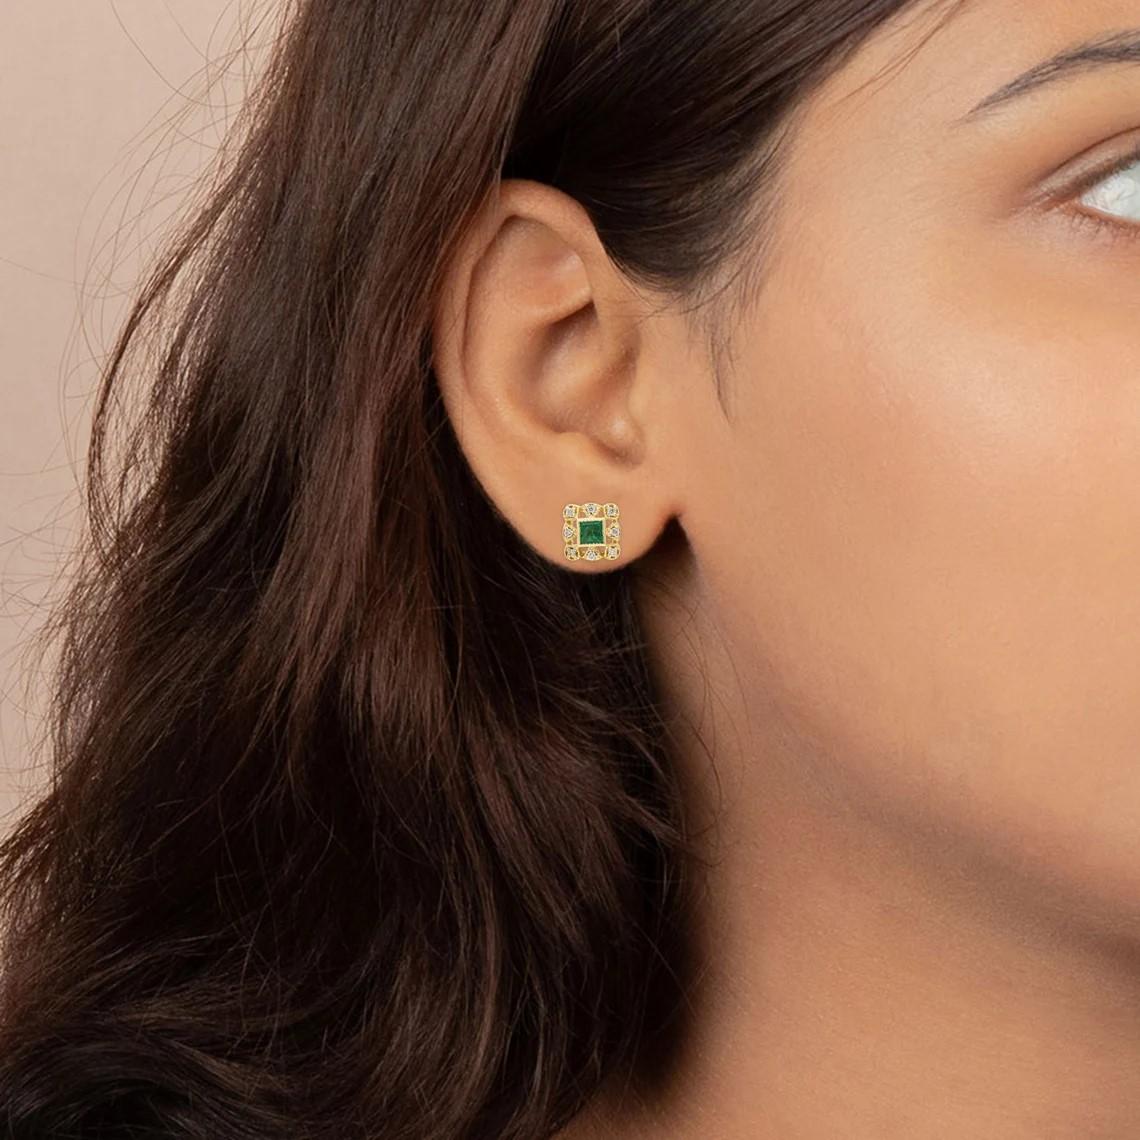 Cast in 14 karat gold, these stud earrings are hand set with .70 carats emerald and .27 carats of glimmering diamonds. 

FOLLOW MEGHNA JEWELS storefront to view the latest collection & exclusive pieces. Meghna Jewels is proudly rated as a Top Seller